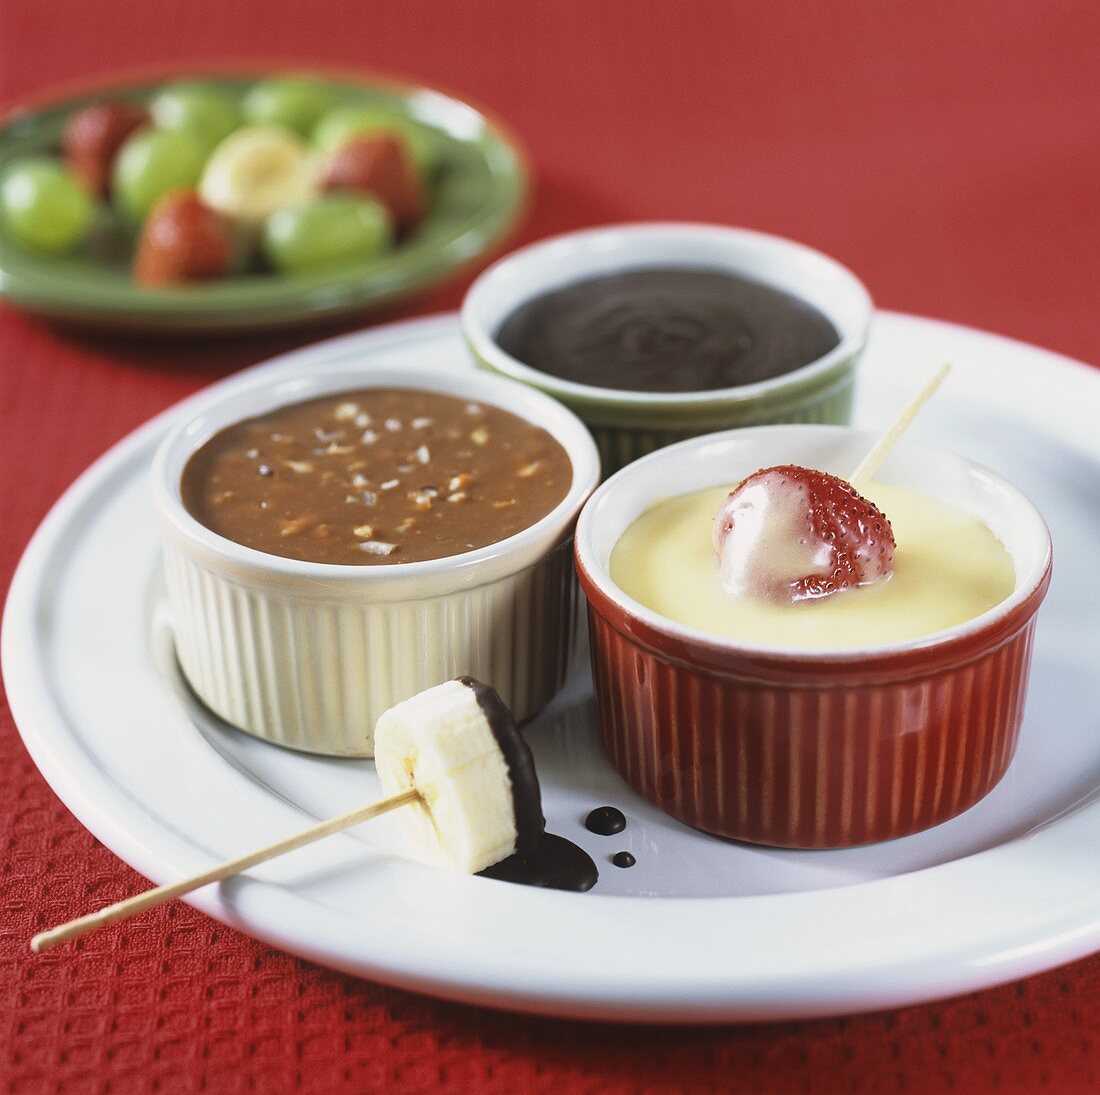 Chocolate fondue made with different chocolates, with fruit